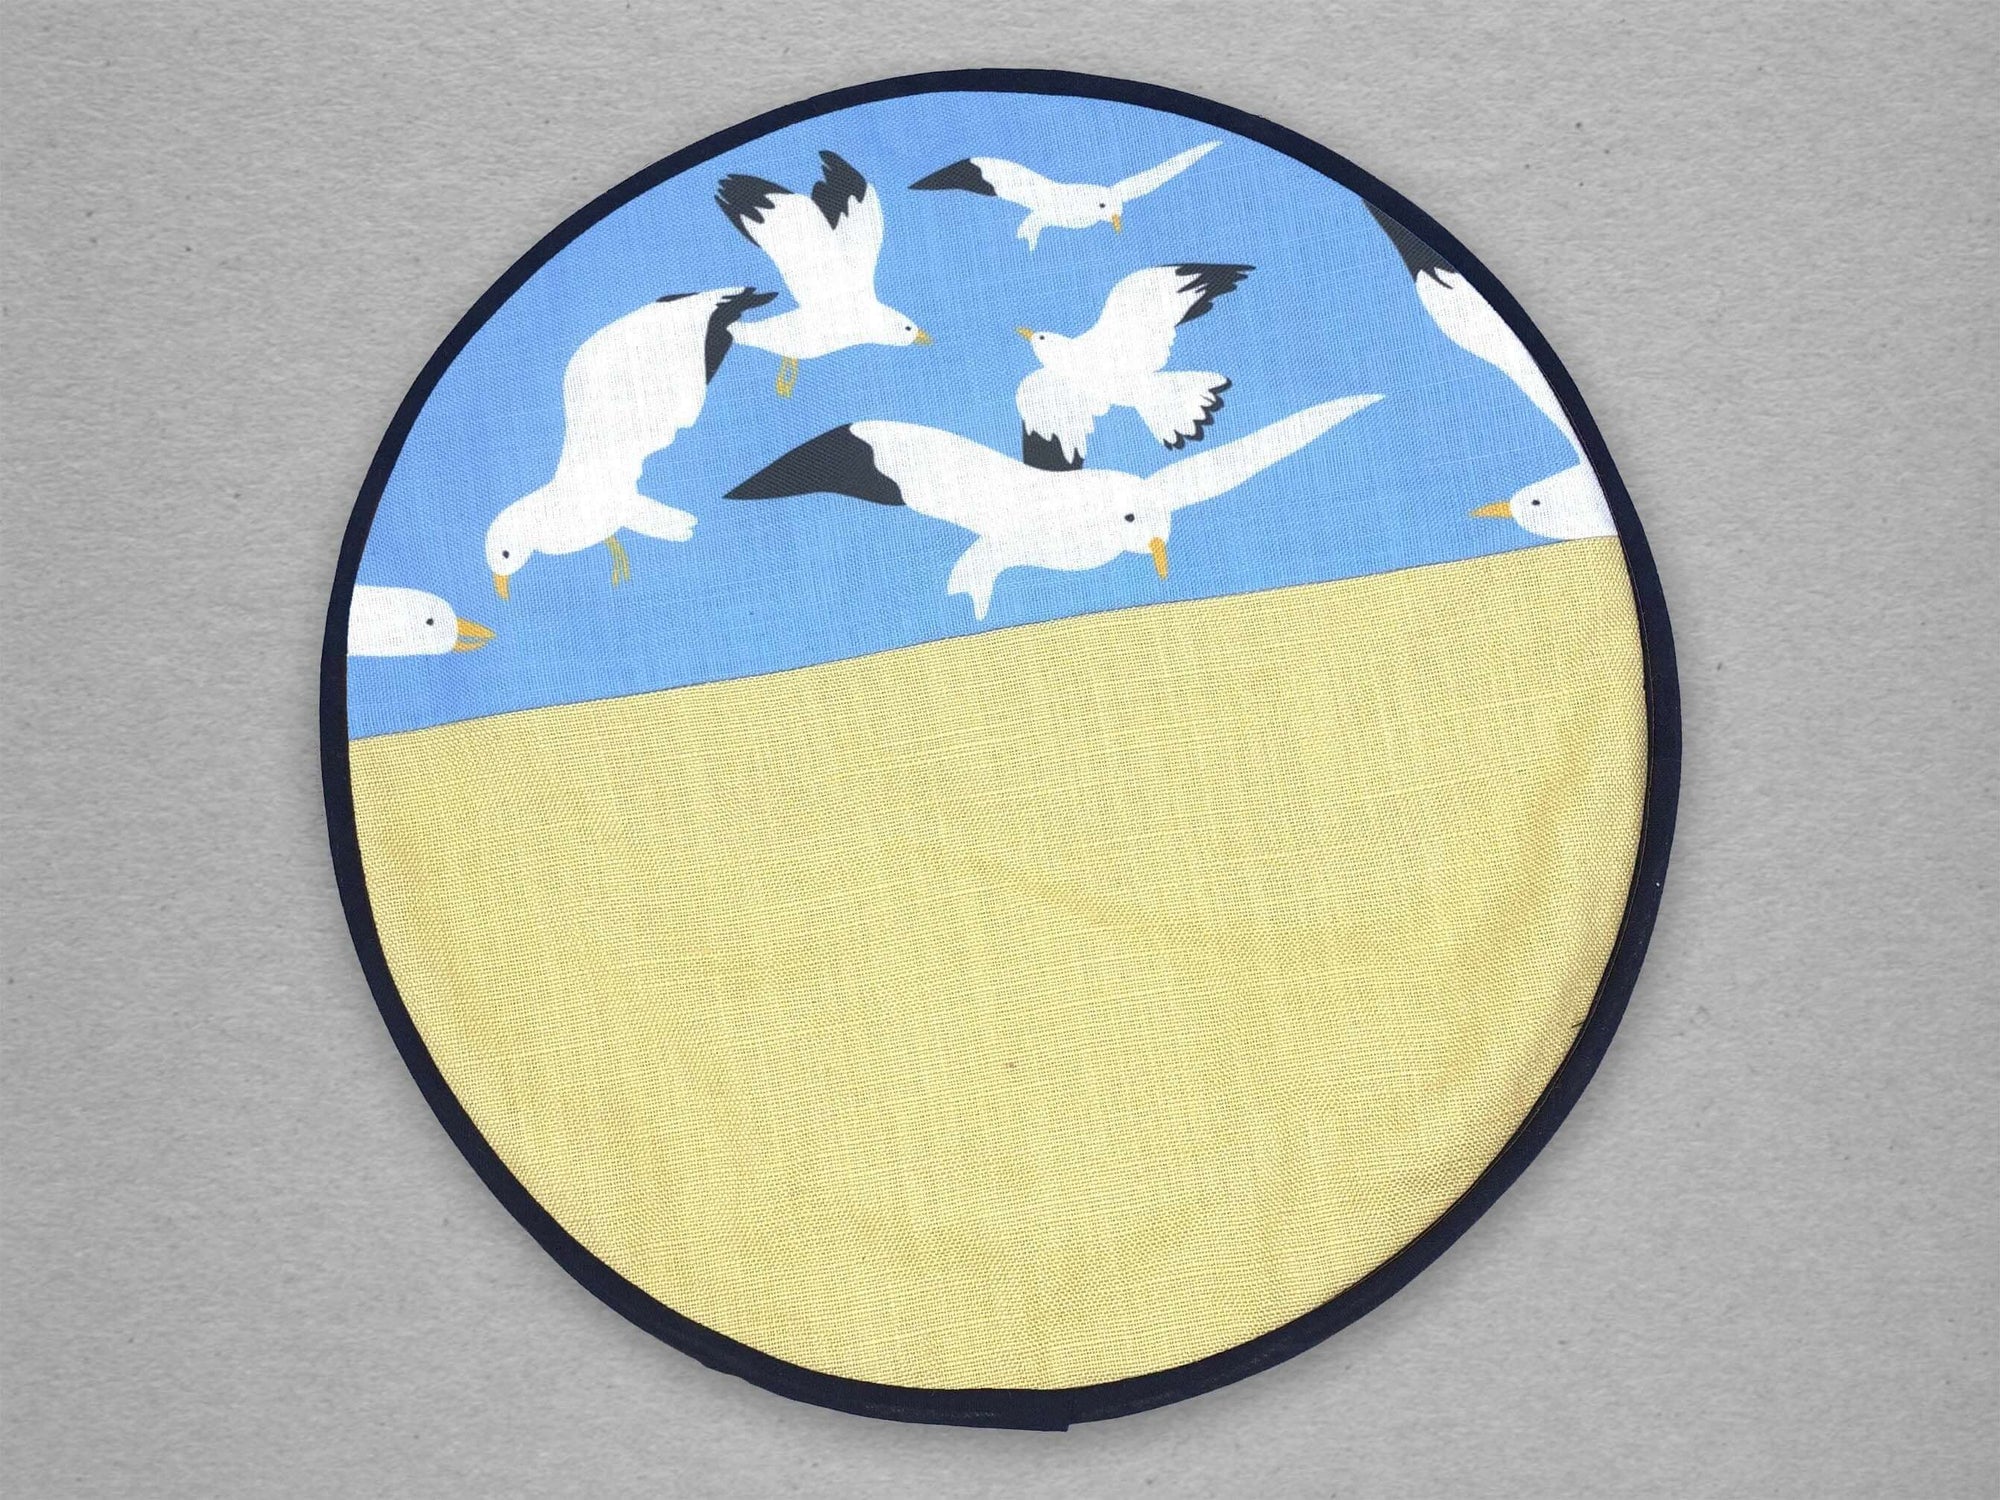 Circular design with seagulls flying on a bright blue background above yellow representing sand. .Oh Gully hob cover cooker Accessories Mustard and Gray Ltd Shropshire UK